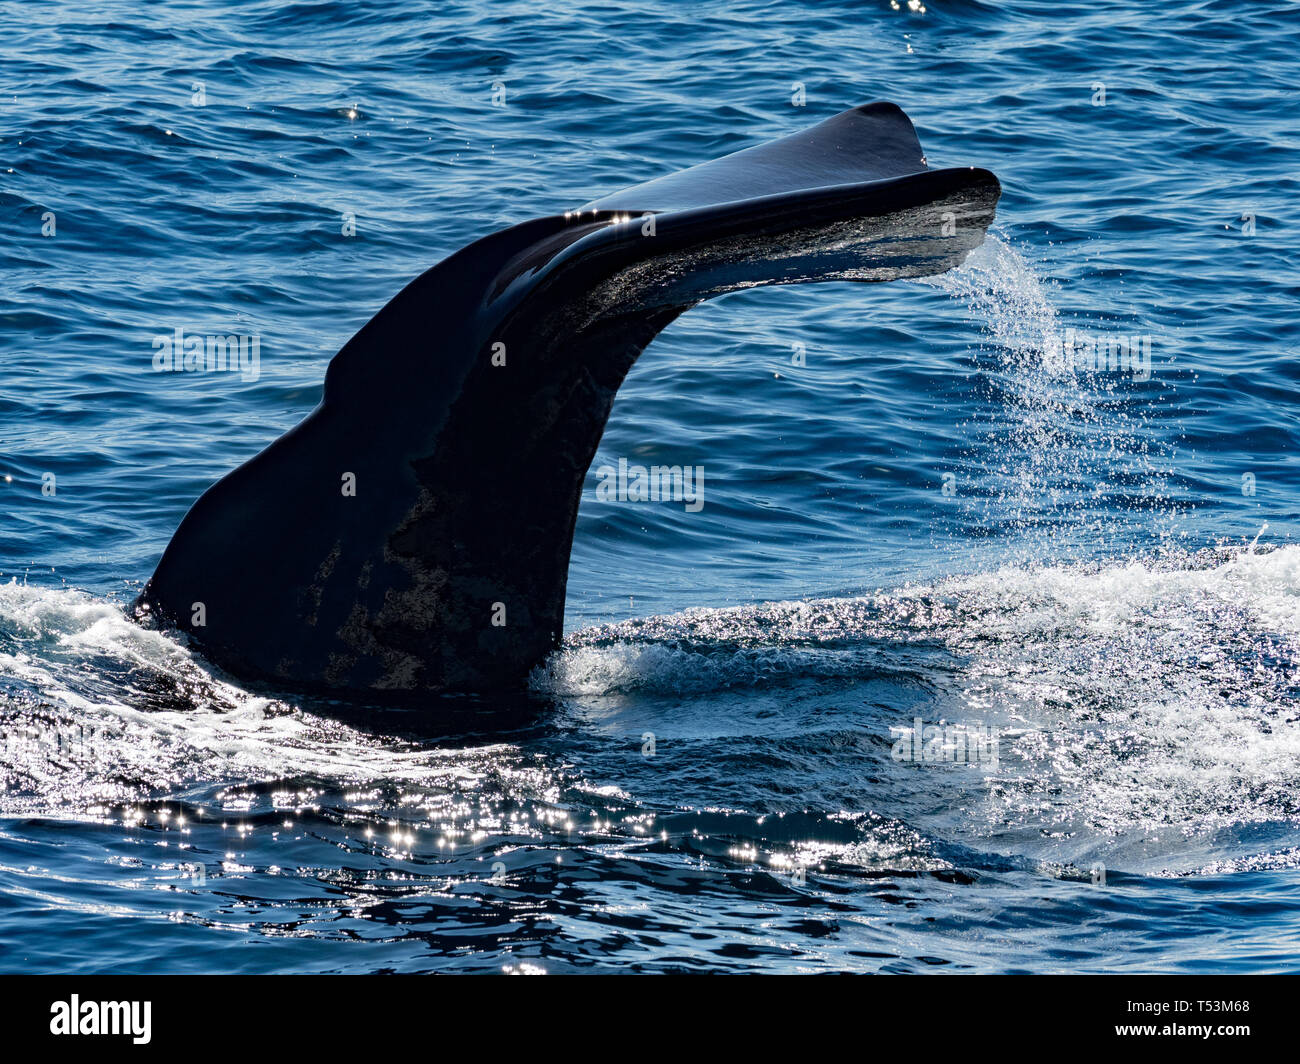 A sperm whale, Physeter macrocephalus, largest toothed whale, showing its tail flukes as it dives deep in the sea of Cortez in Baja, Mexico Stock Photo